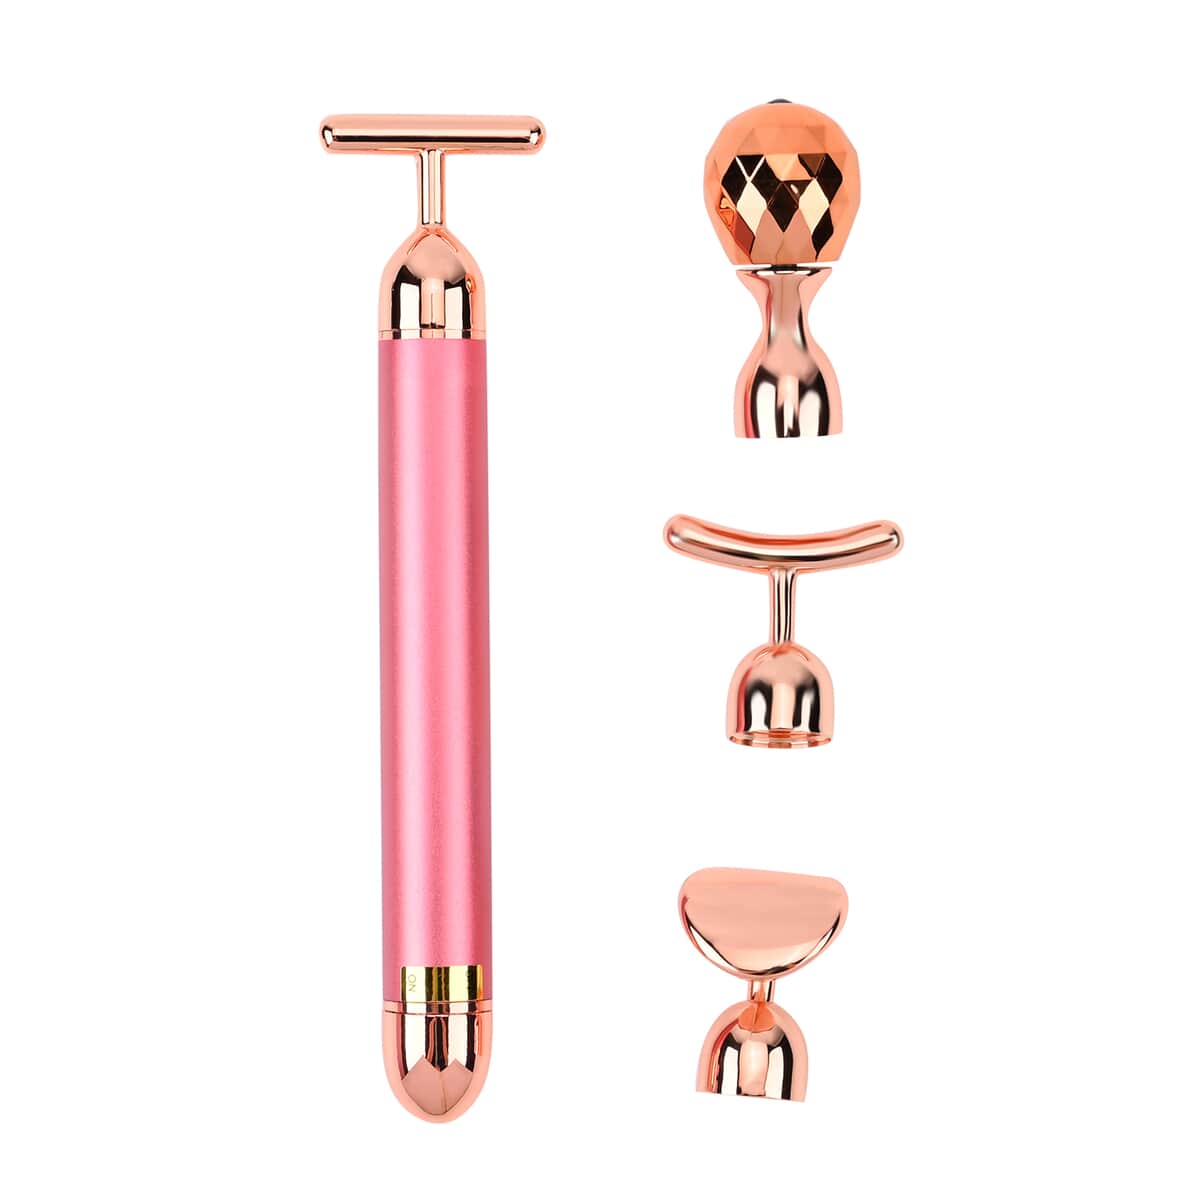 4-in-1 Face Massager Rollers with Four Interchangeable Massage Heads - Rose Gold, 1xAA Battery Not Including image number 0